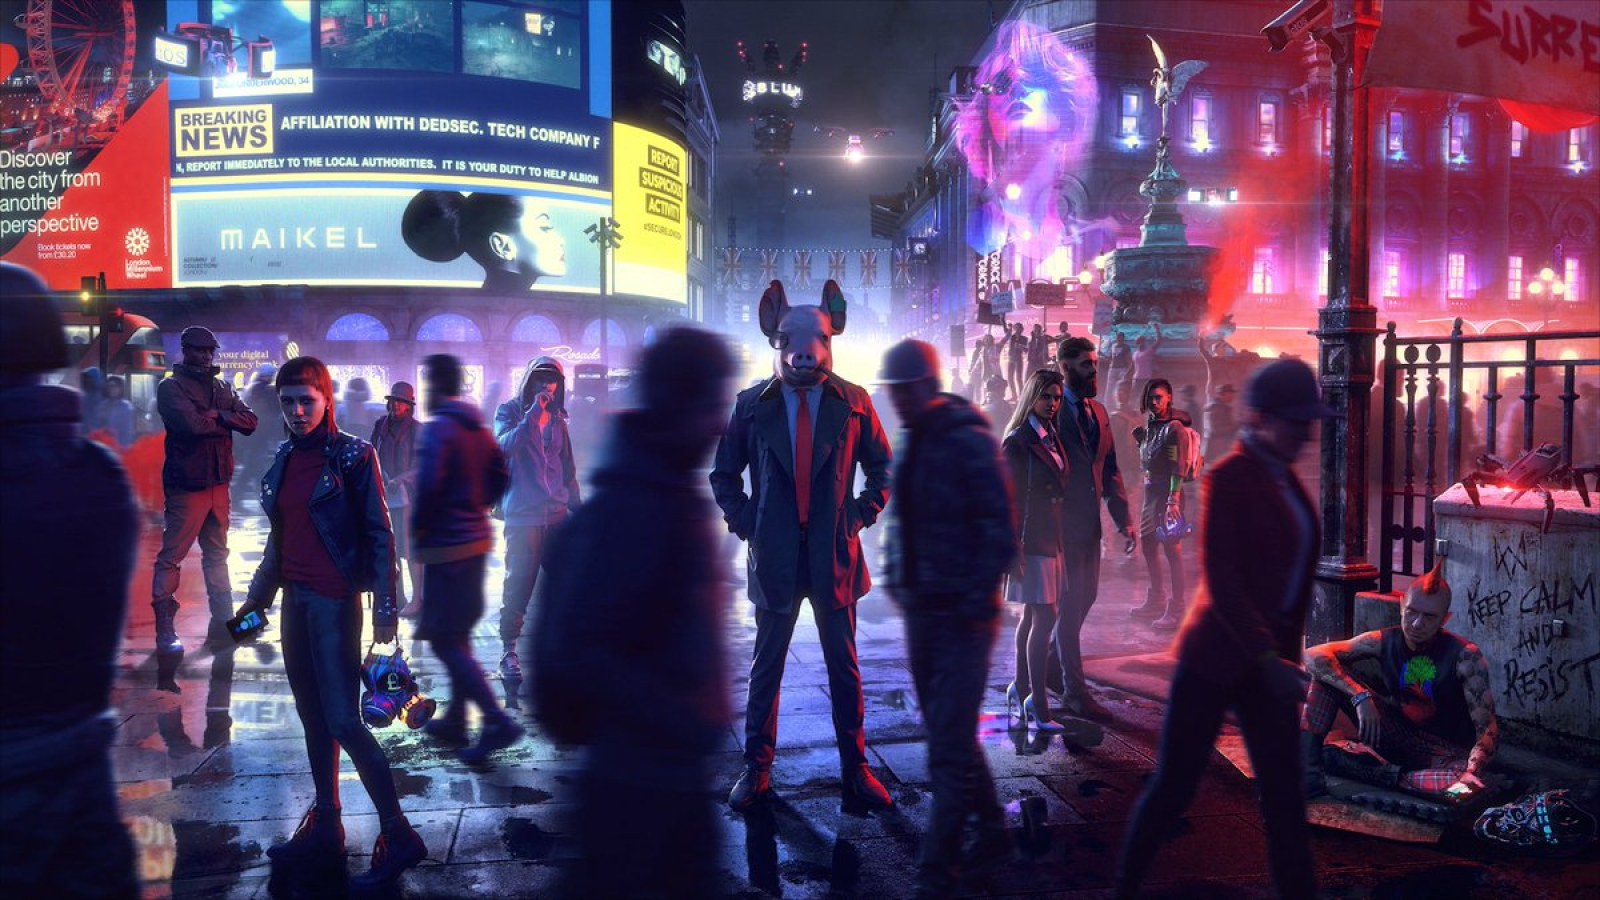 Watch Dogs Legion: gameplay trailer, release date, and more - Obilisk